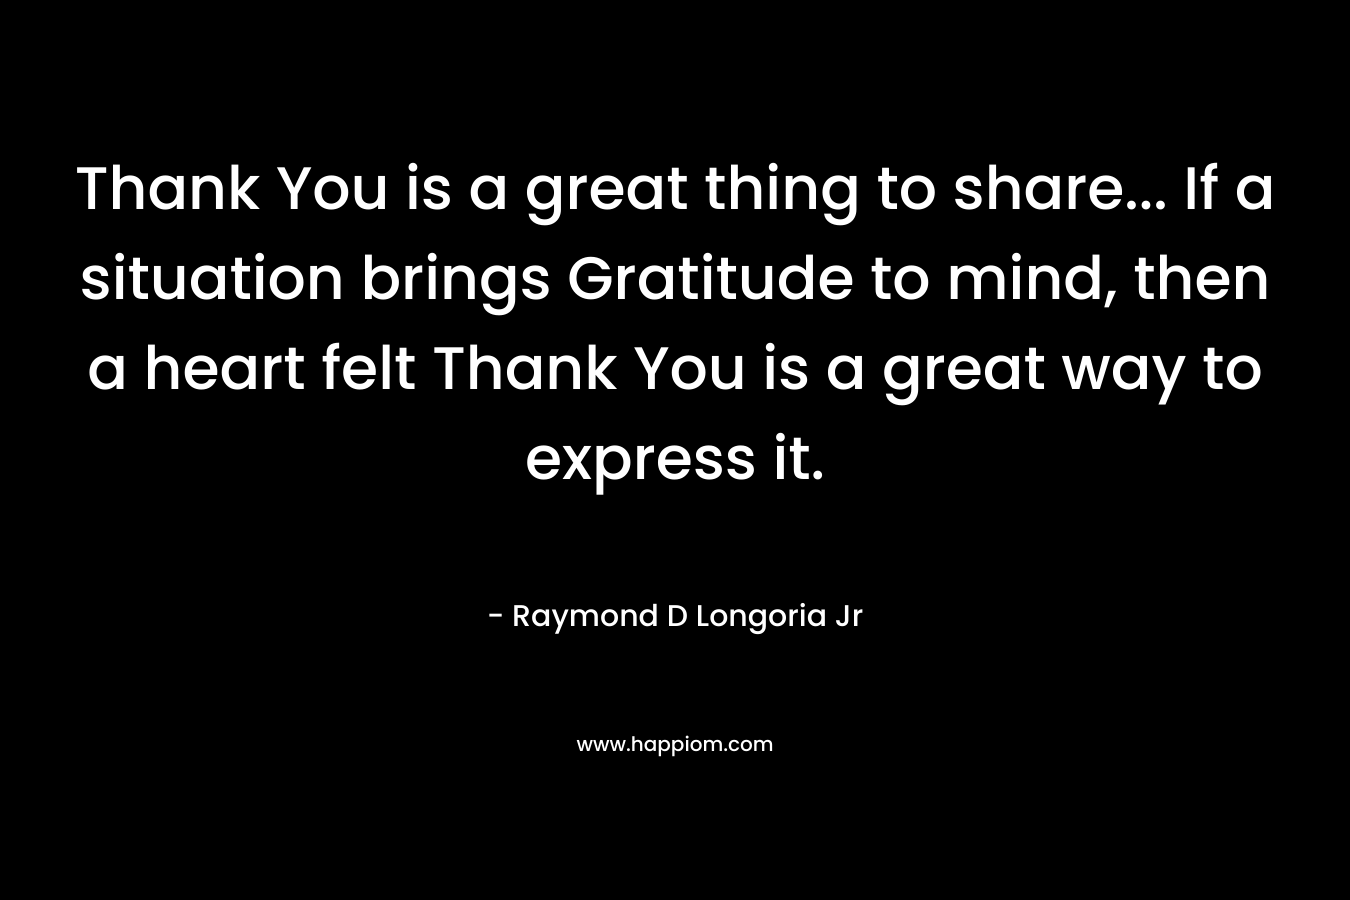 Thank You is a great thing to share... If a situation brings Gratitude to mind, then a heart felt Thank You is a great way to express it.